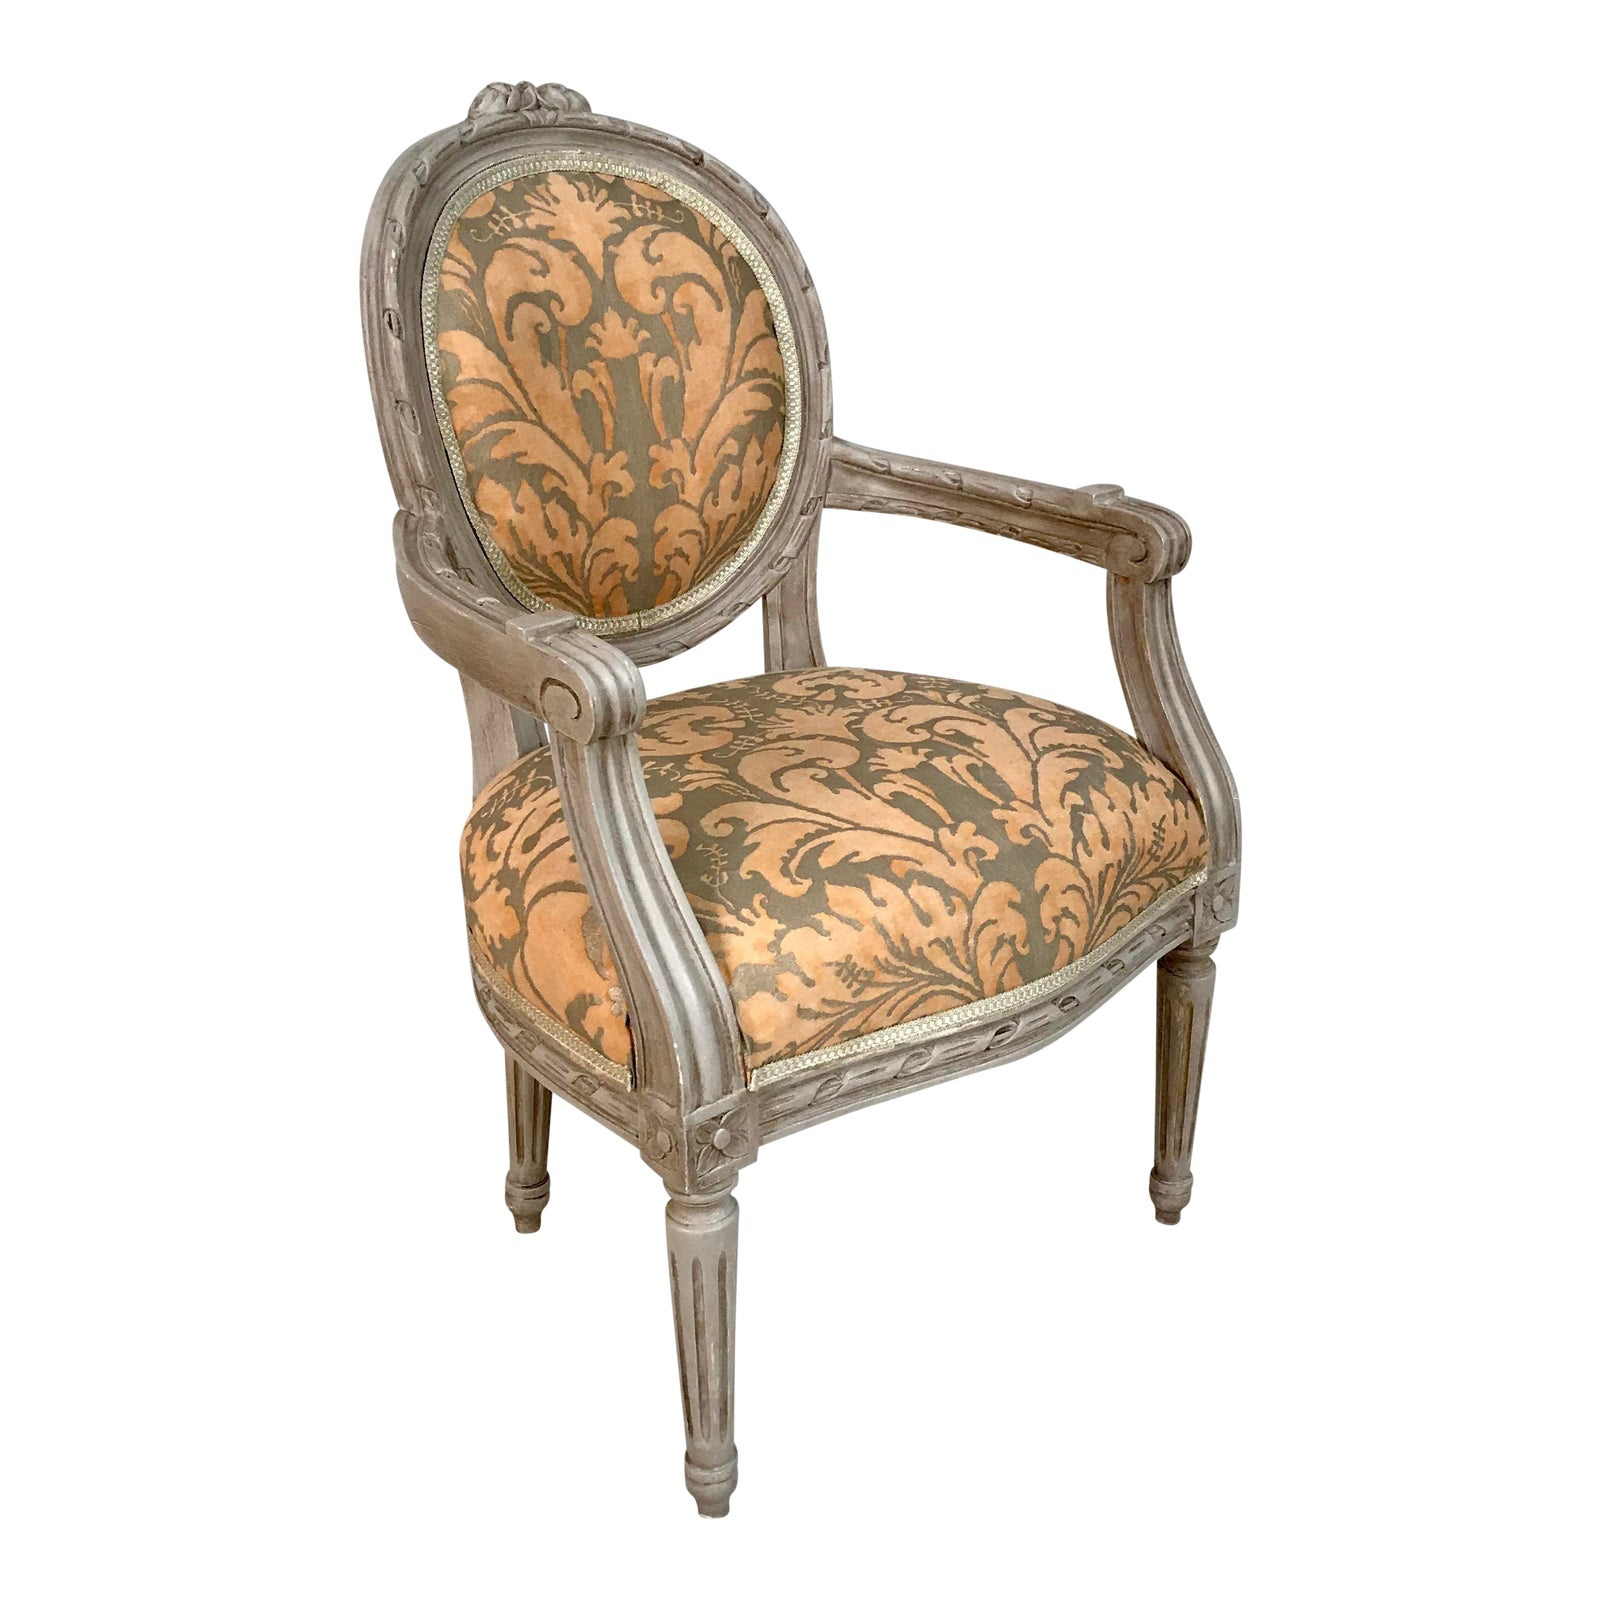 NEW AVAILABLE Early 19th Century King Louis XVI Style Accent 